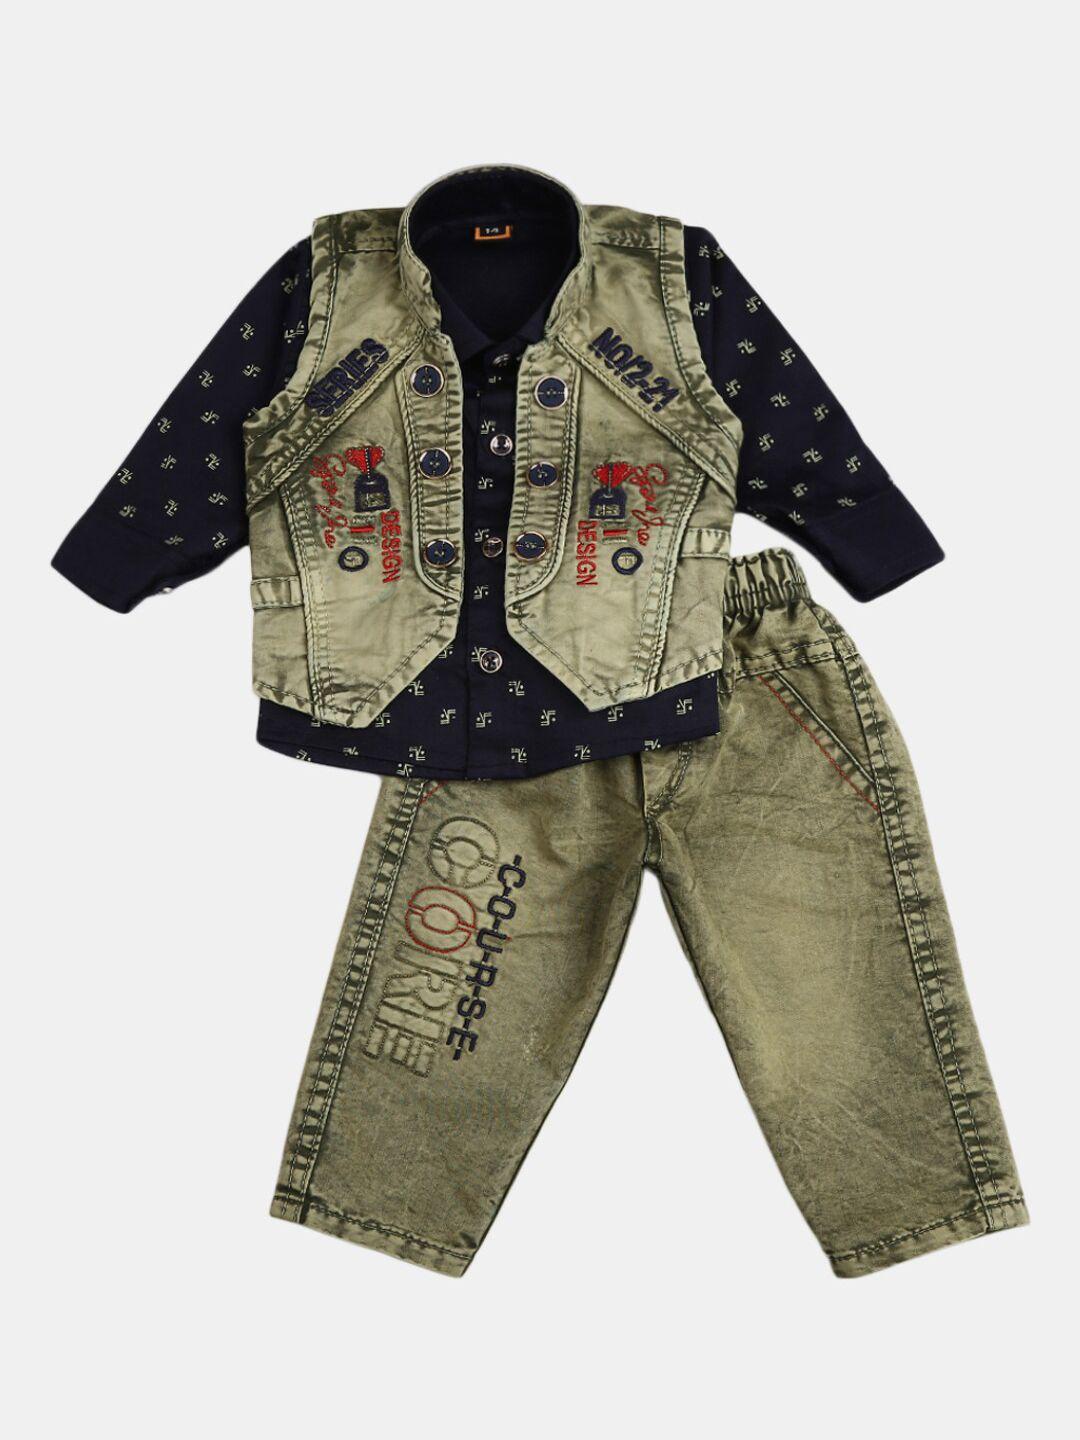 v-mart kids olive green & navy blue printed shirt with trousers